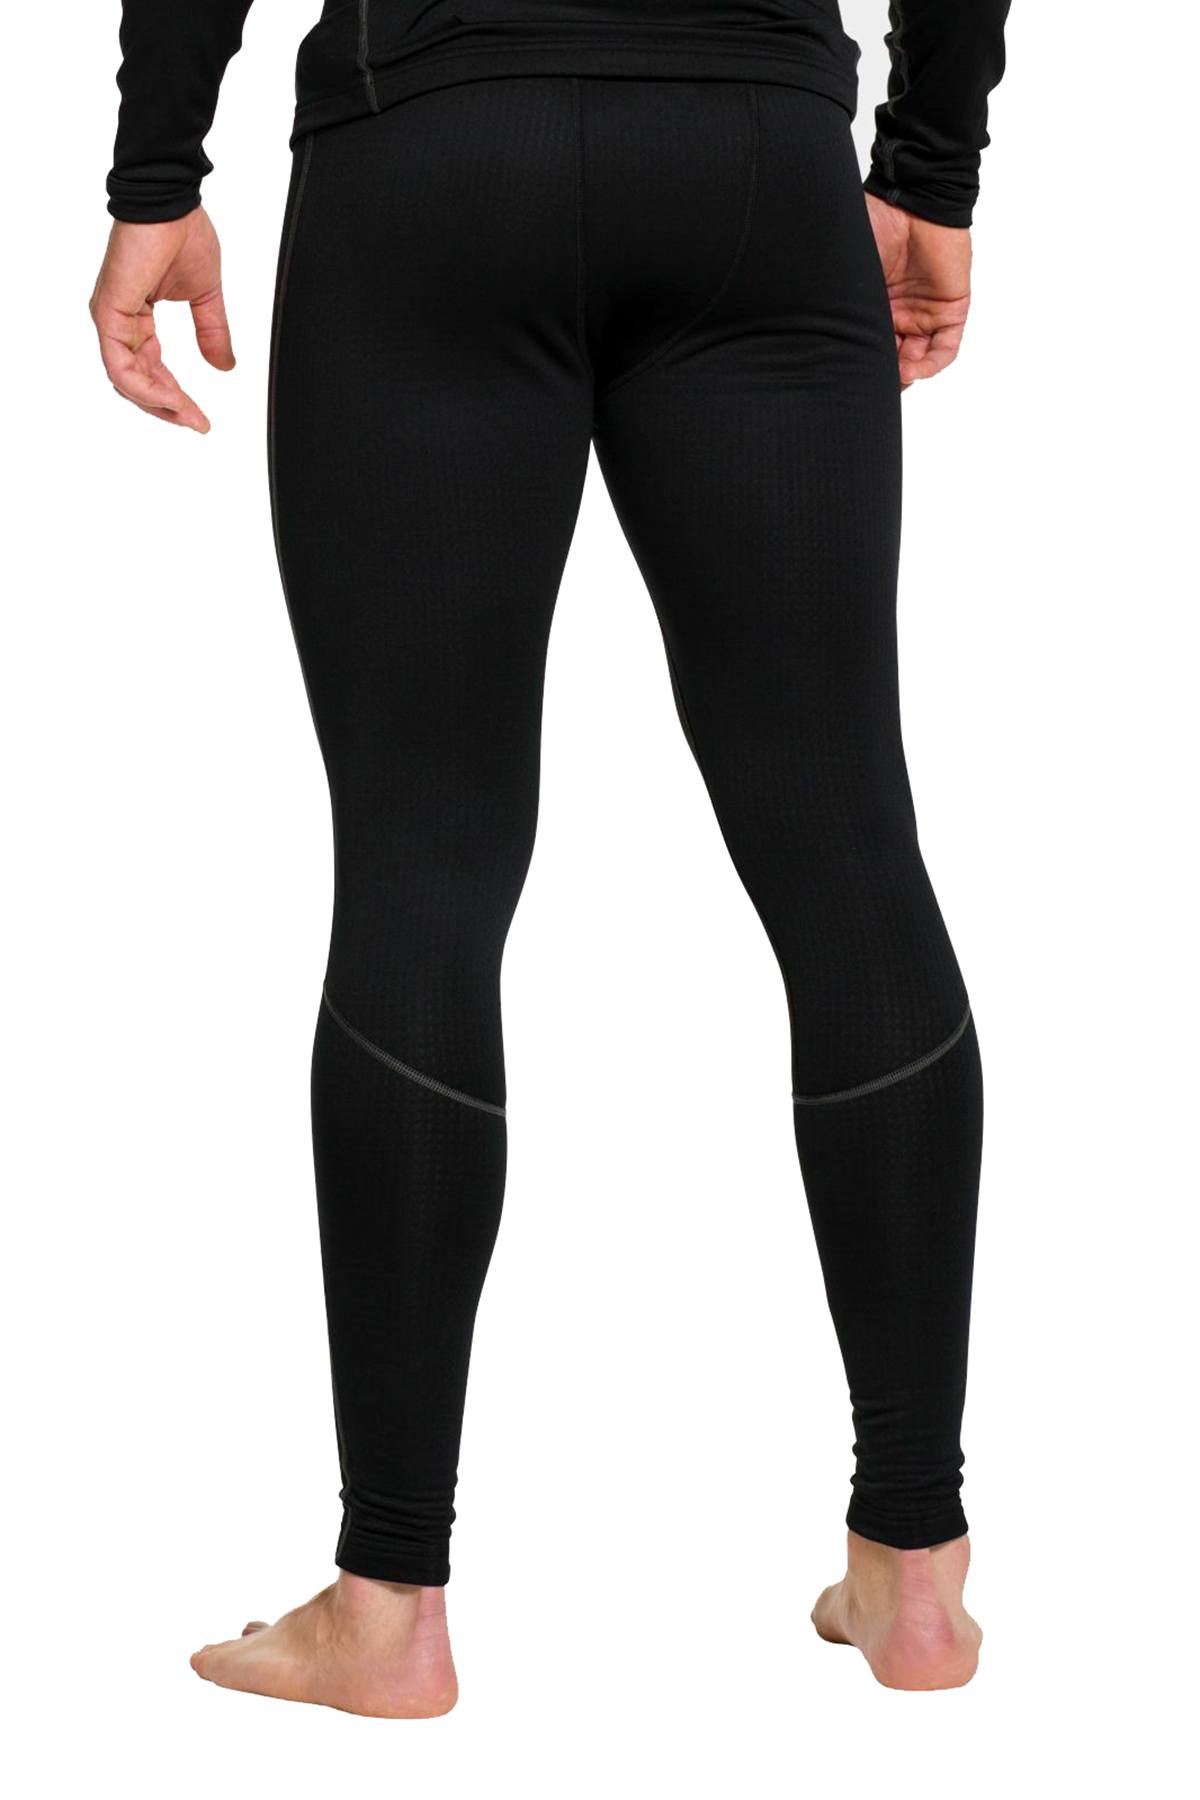 Under Armour Midweight Base 2.0 Legging